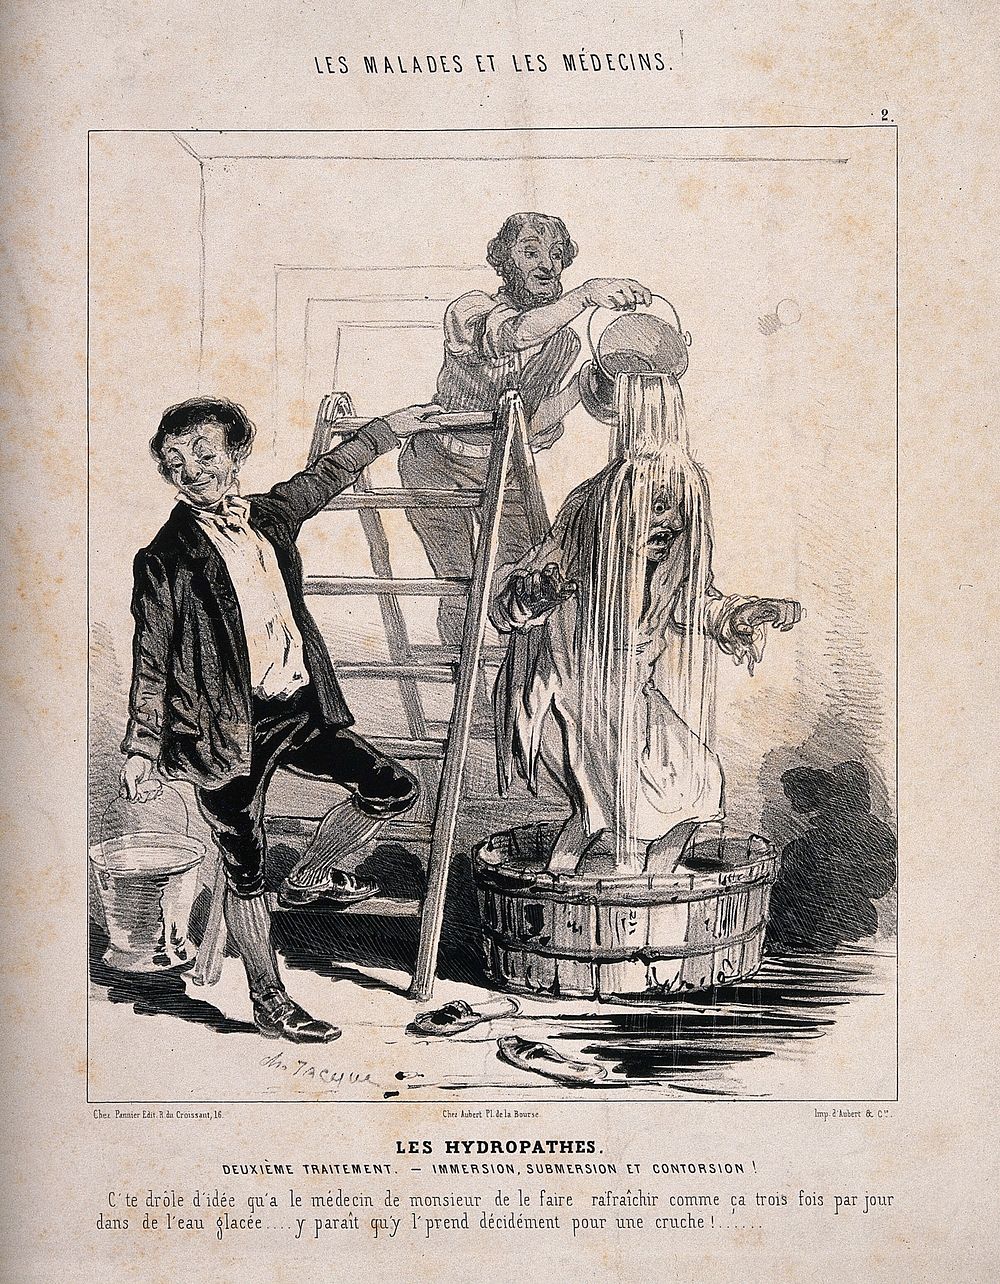 A man is treated to a cascade of water in the name of hydropathy. Lithograph by C. Jacque, 1843.